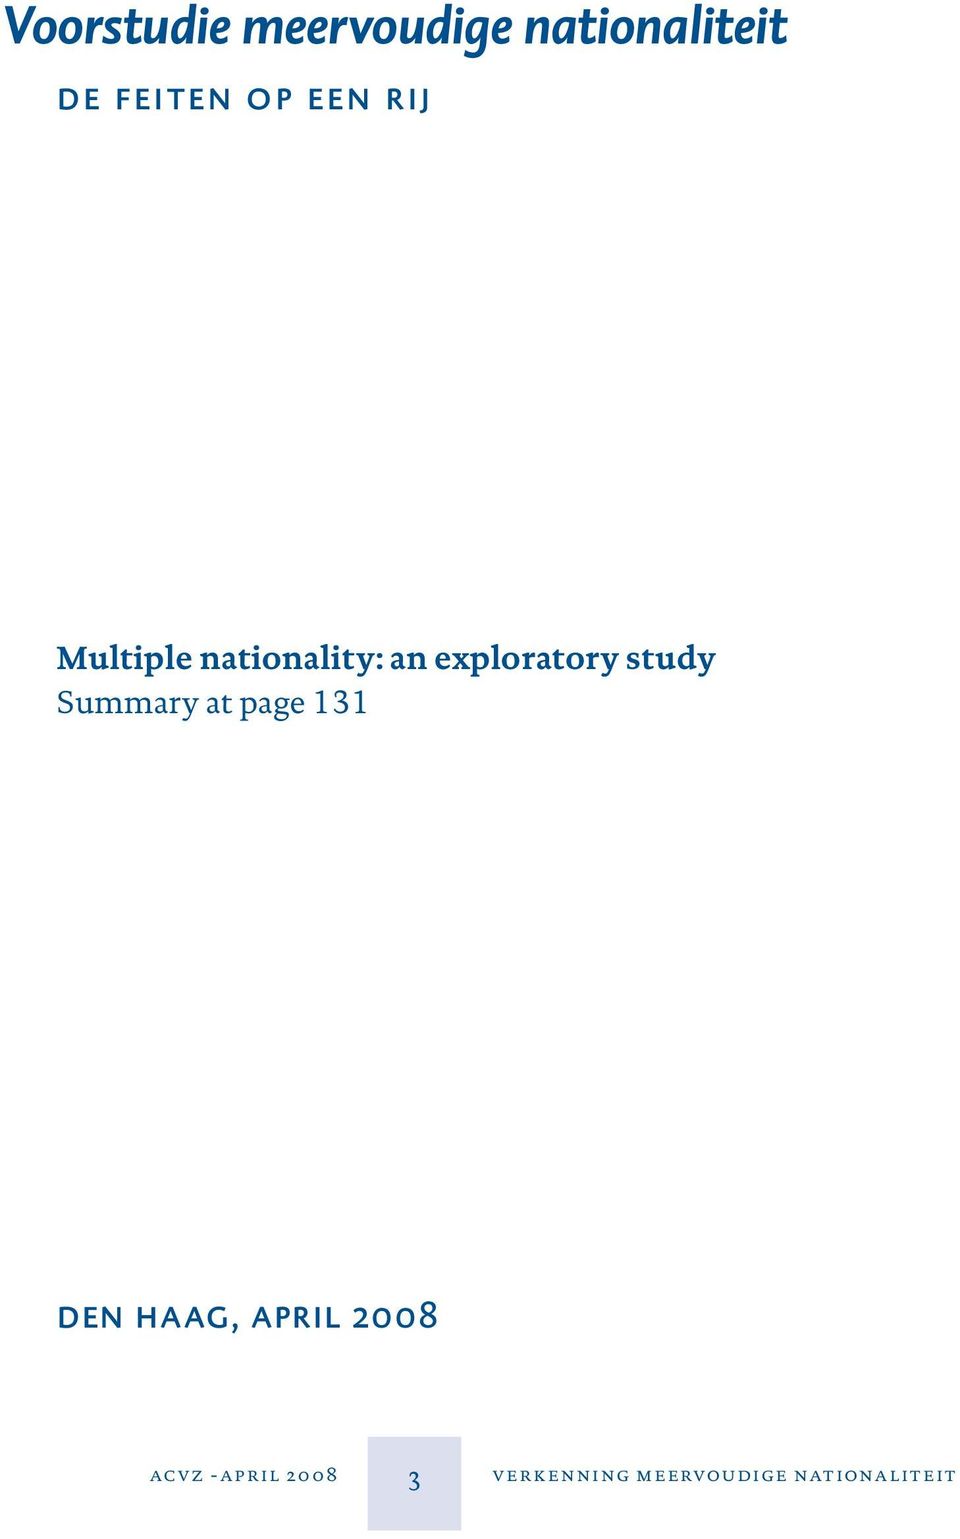 an exploratory study Summary at page